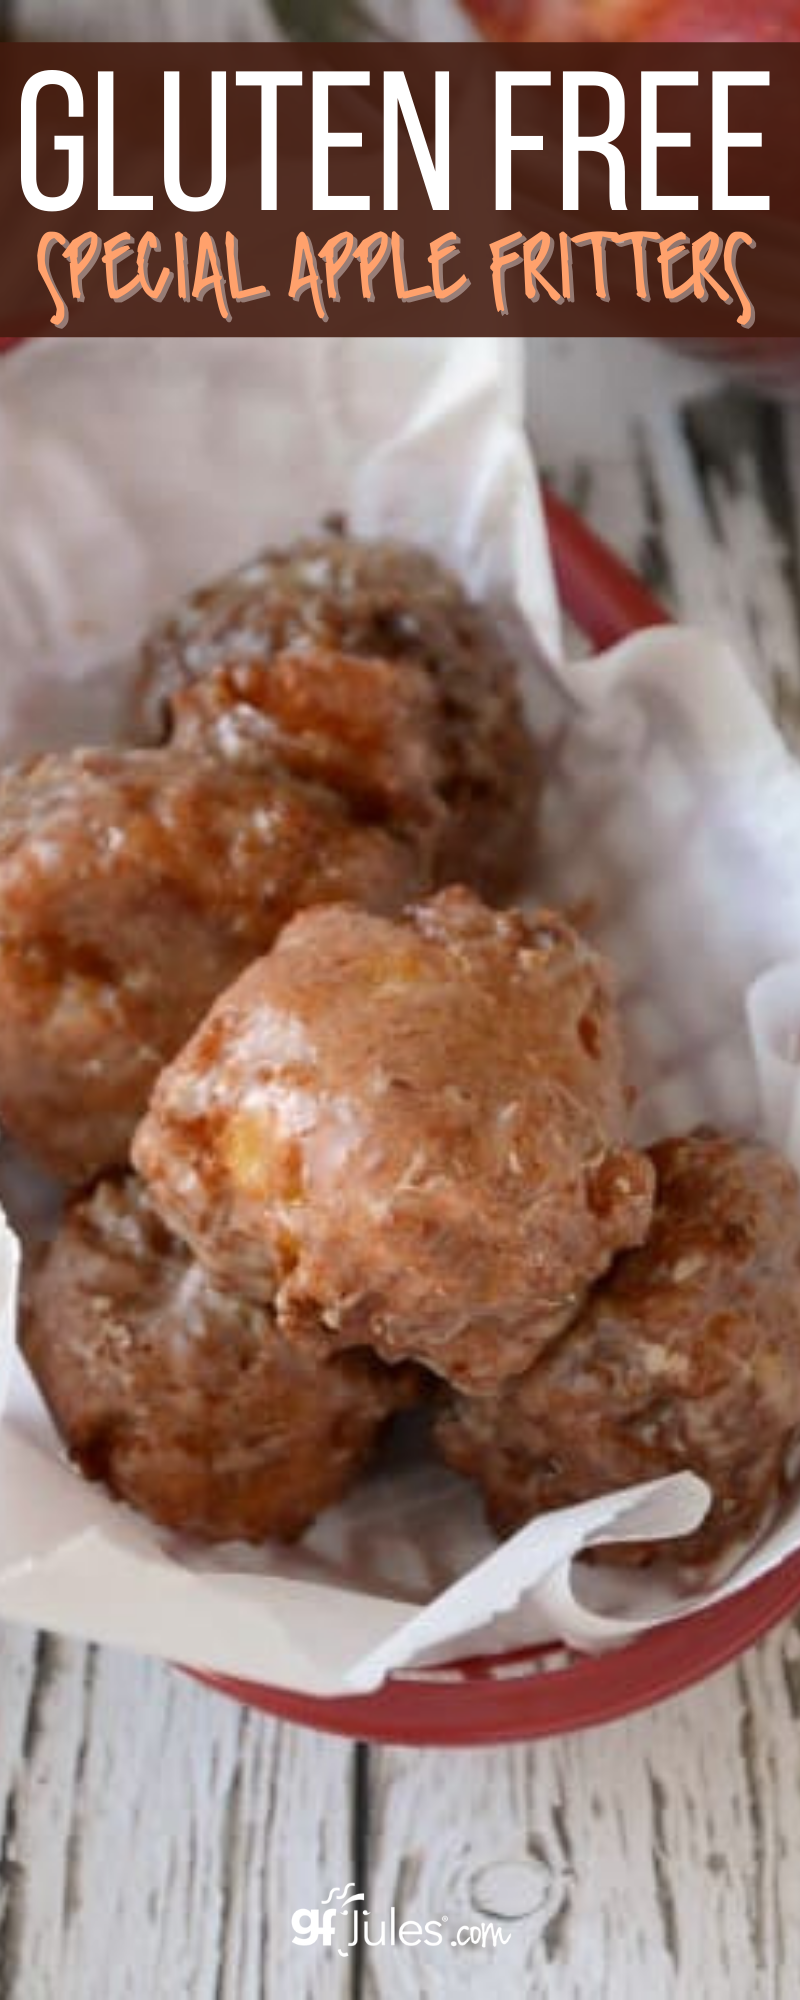 Gluten Free Special Apple Fritters